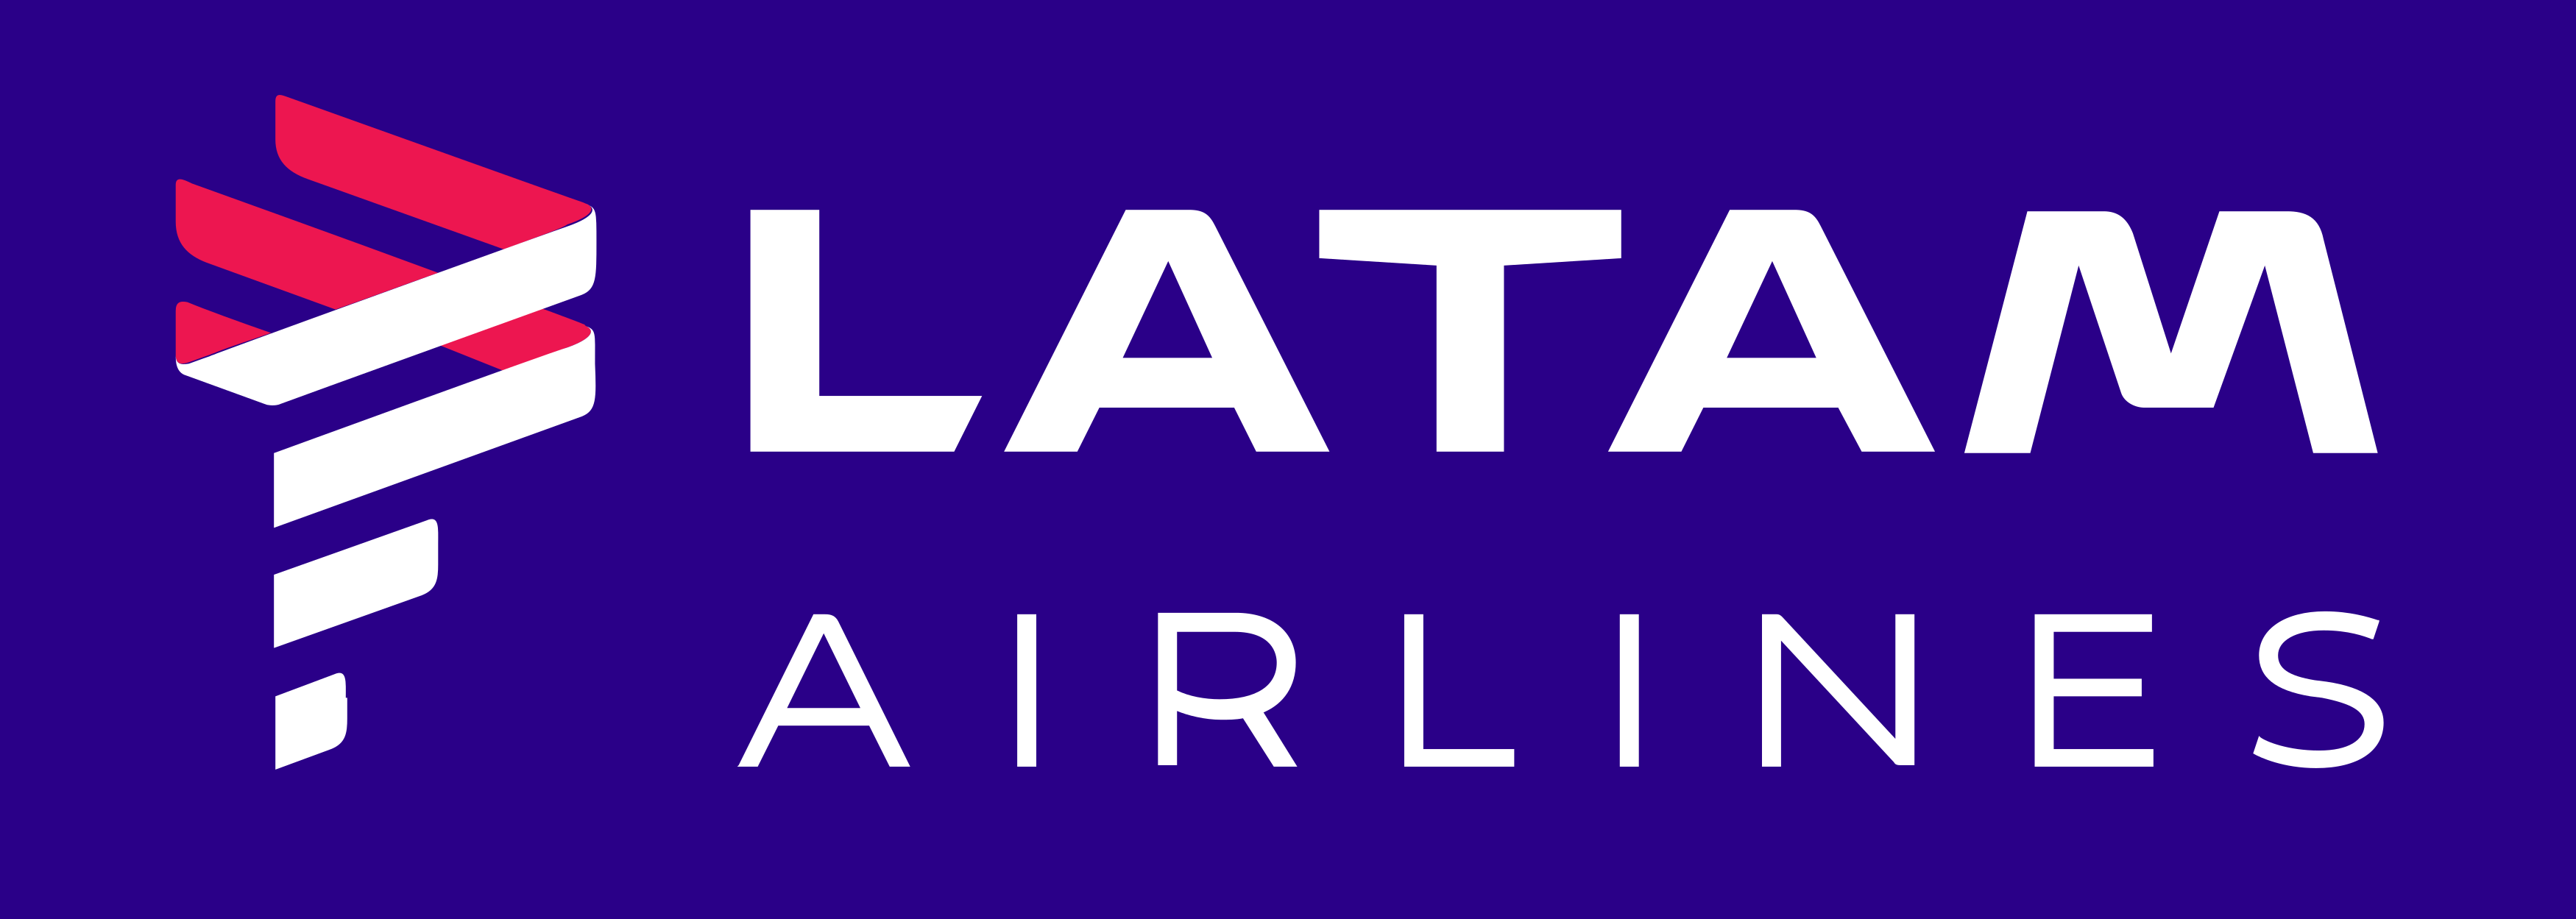 Latam Airlines Logo. - Latam Airlines, Transparent background PNG HD thumbnail